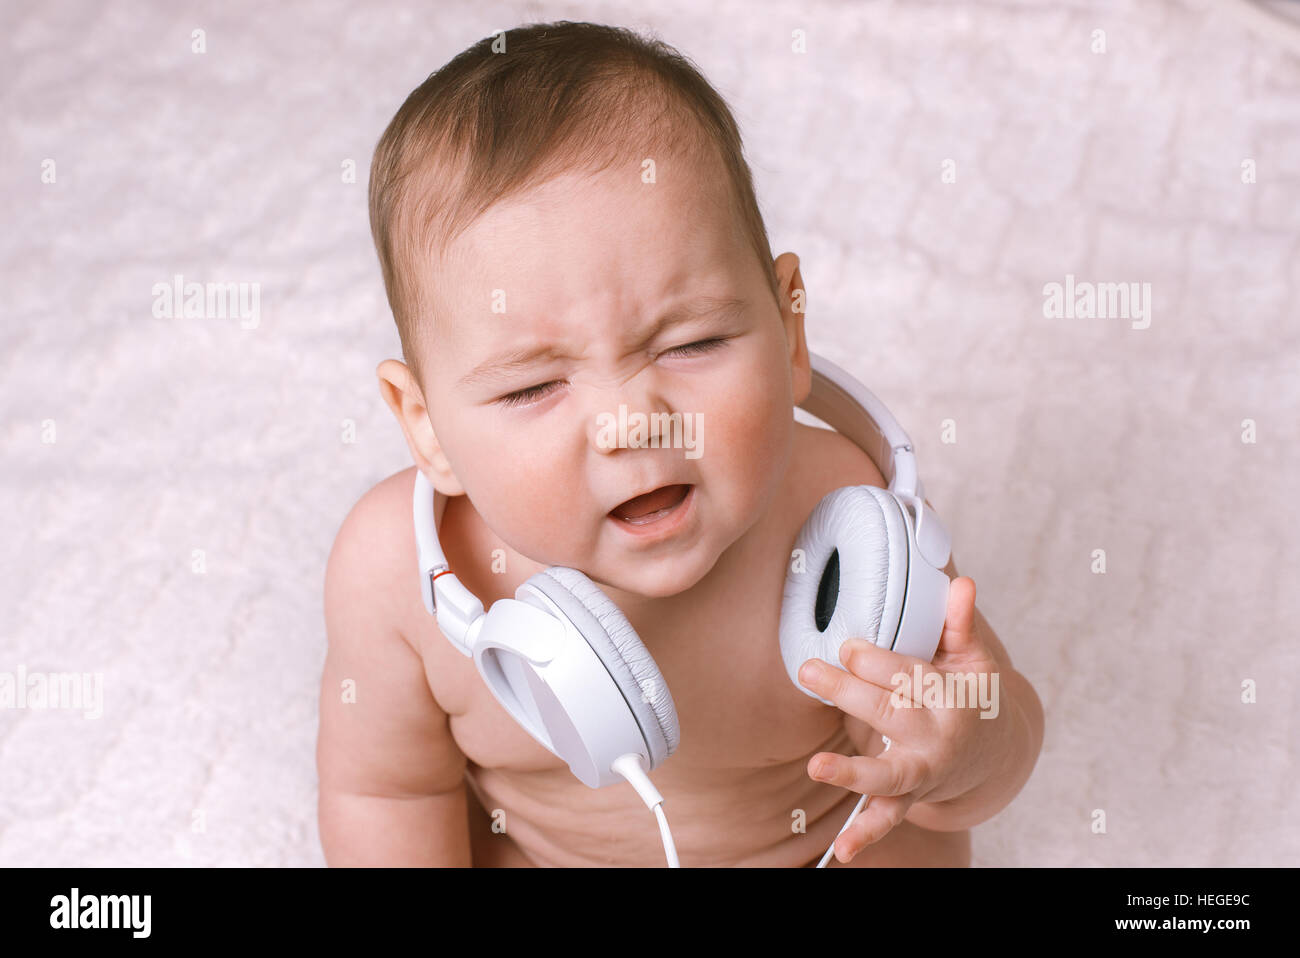 Small baby wearing earphones around its neck as it sits on its woolly rug crying as the audio noise upsets it Stock Photo